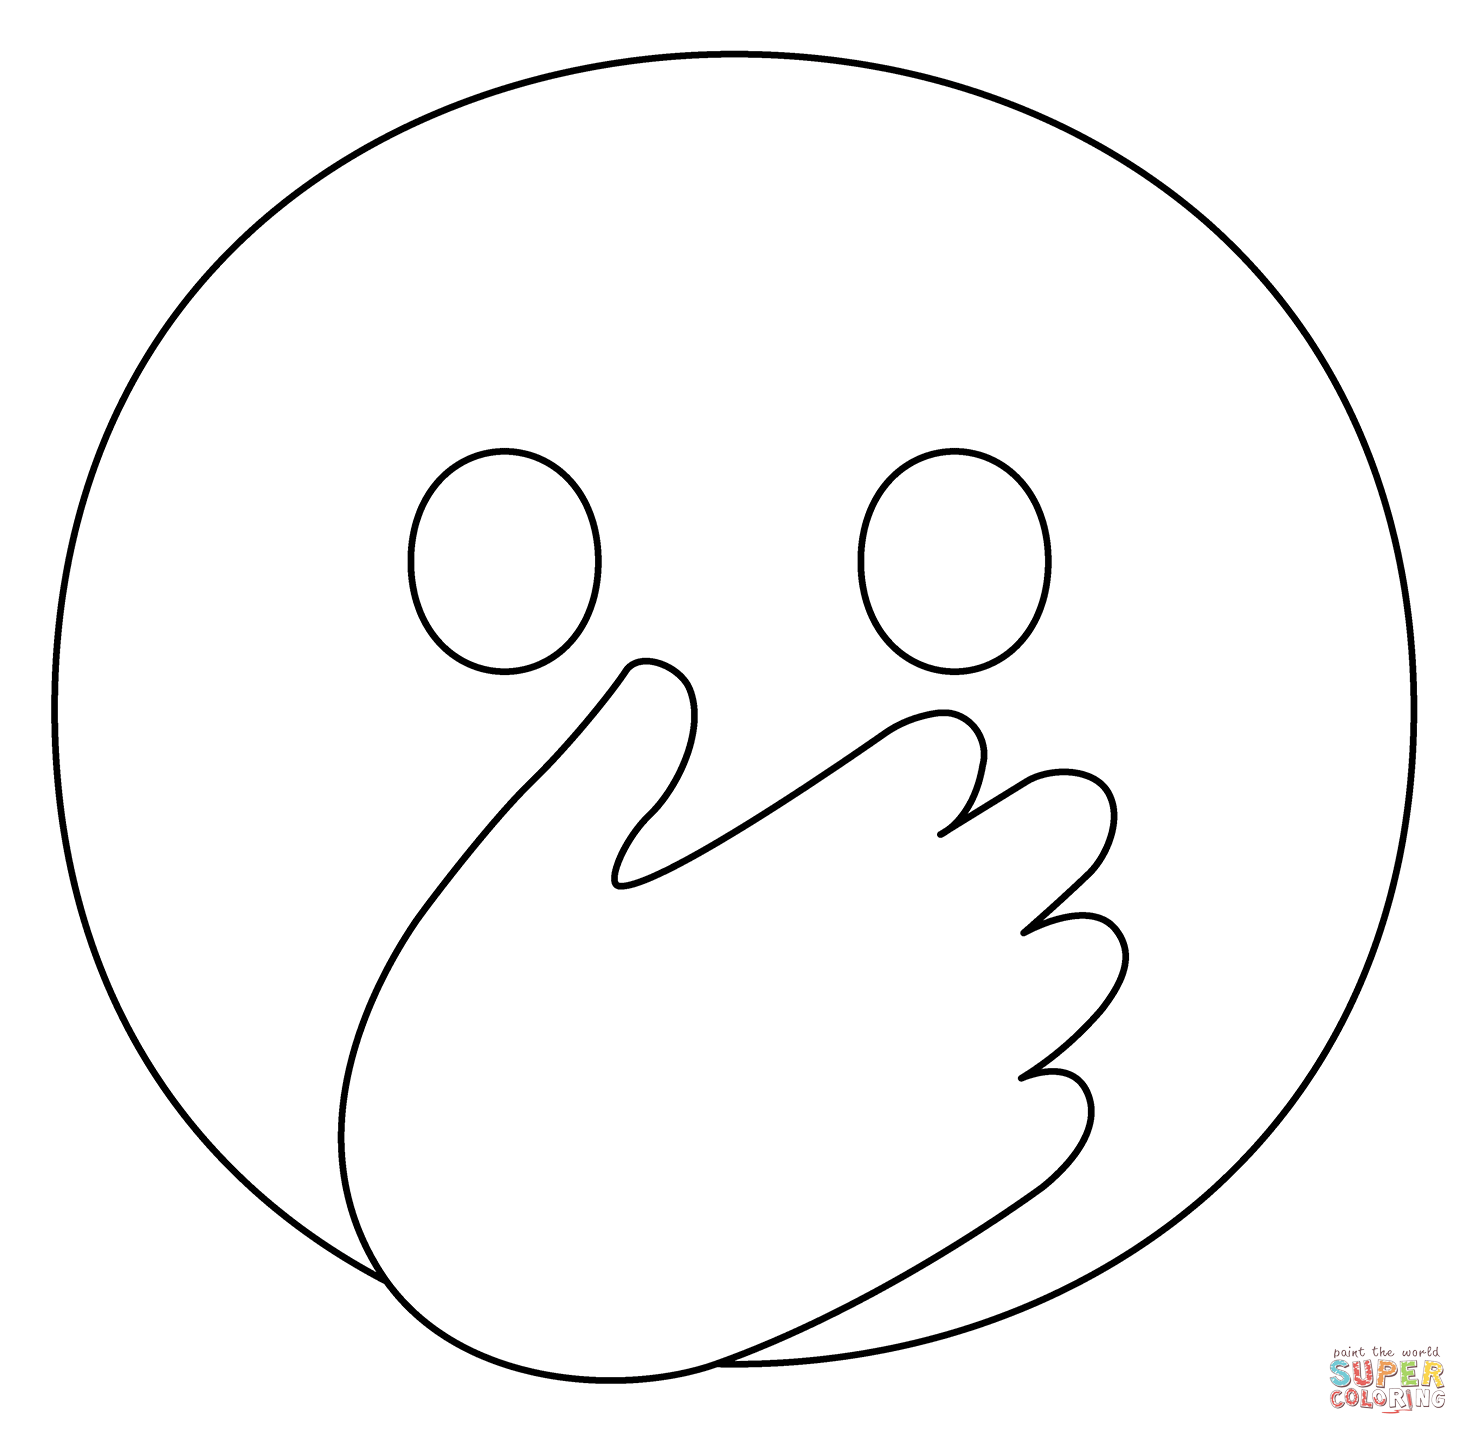 Face with open eyes and hand over mouth emoji coloring page free printable coloring pages